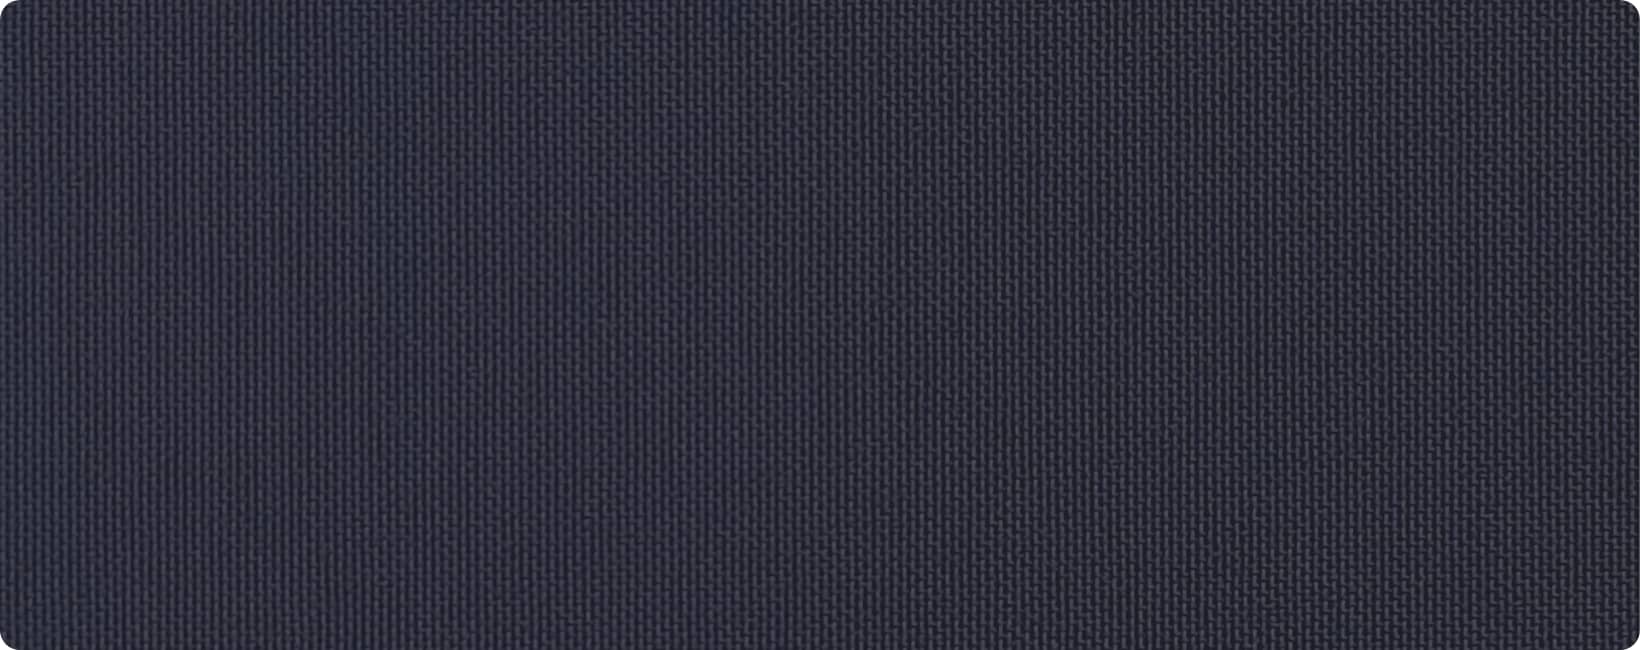 N66 CORDURA® PU2 Military and Protection Fabric, Functional Fabrics &  Knitted Fabrics Manufacturer